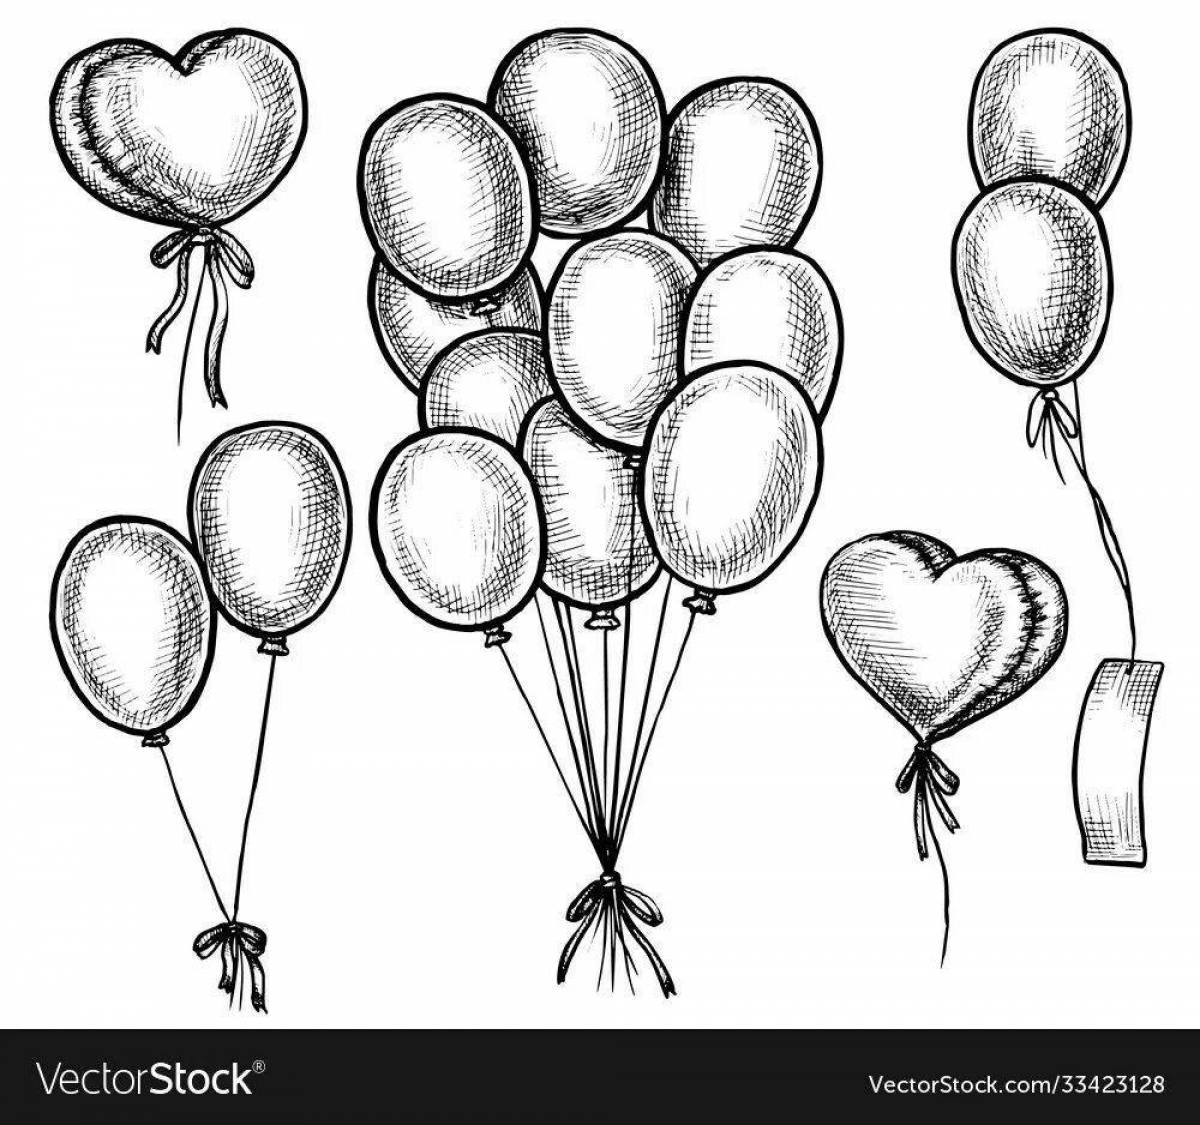 A fascinating coloring book with a bouquet of balloons